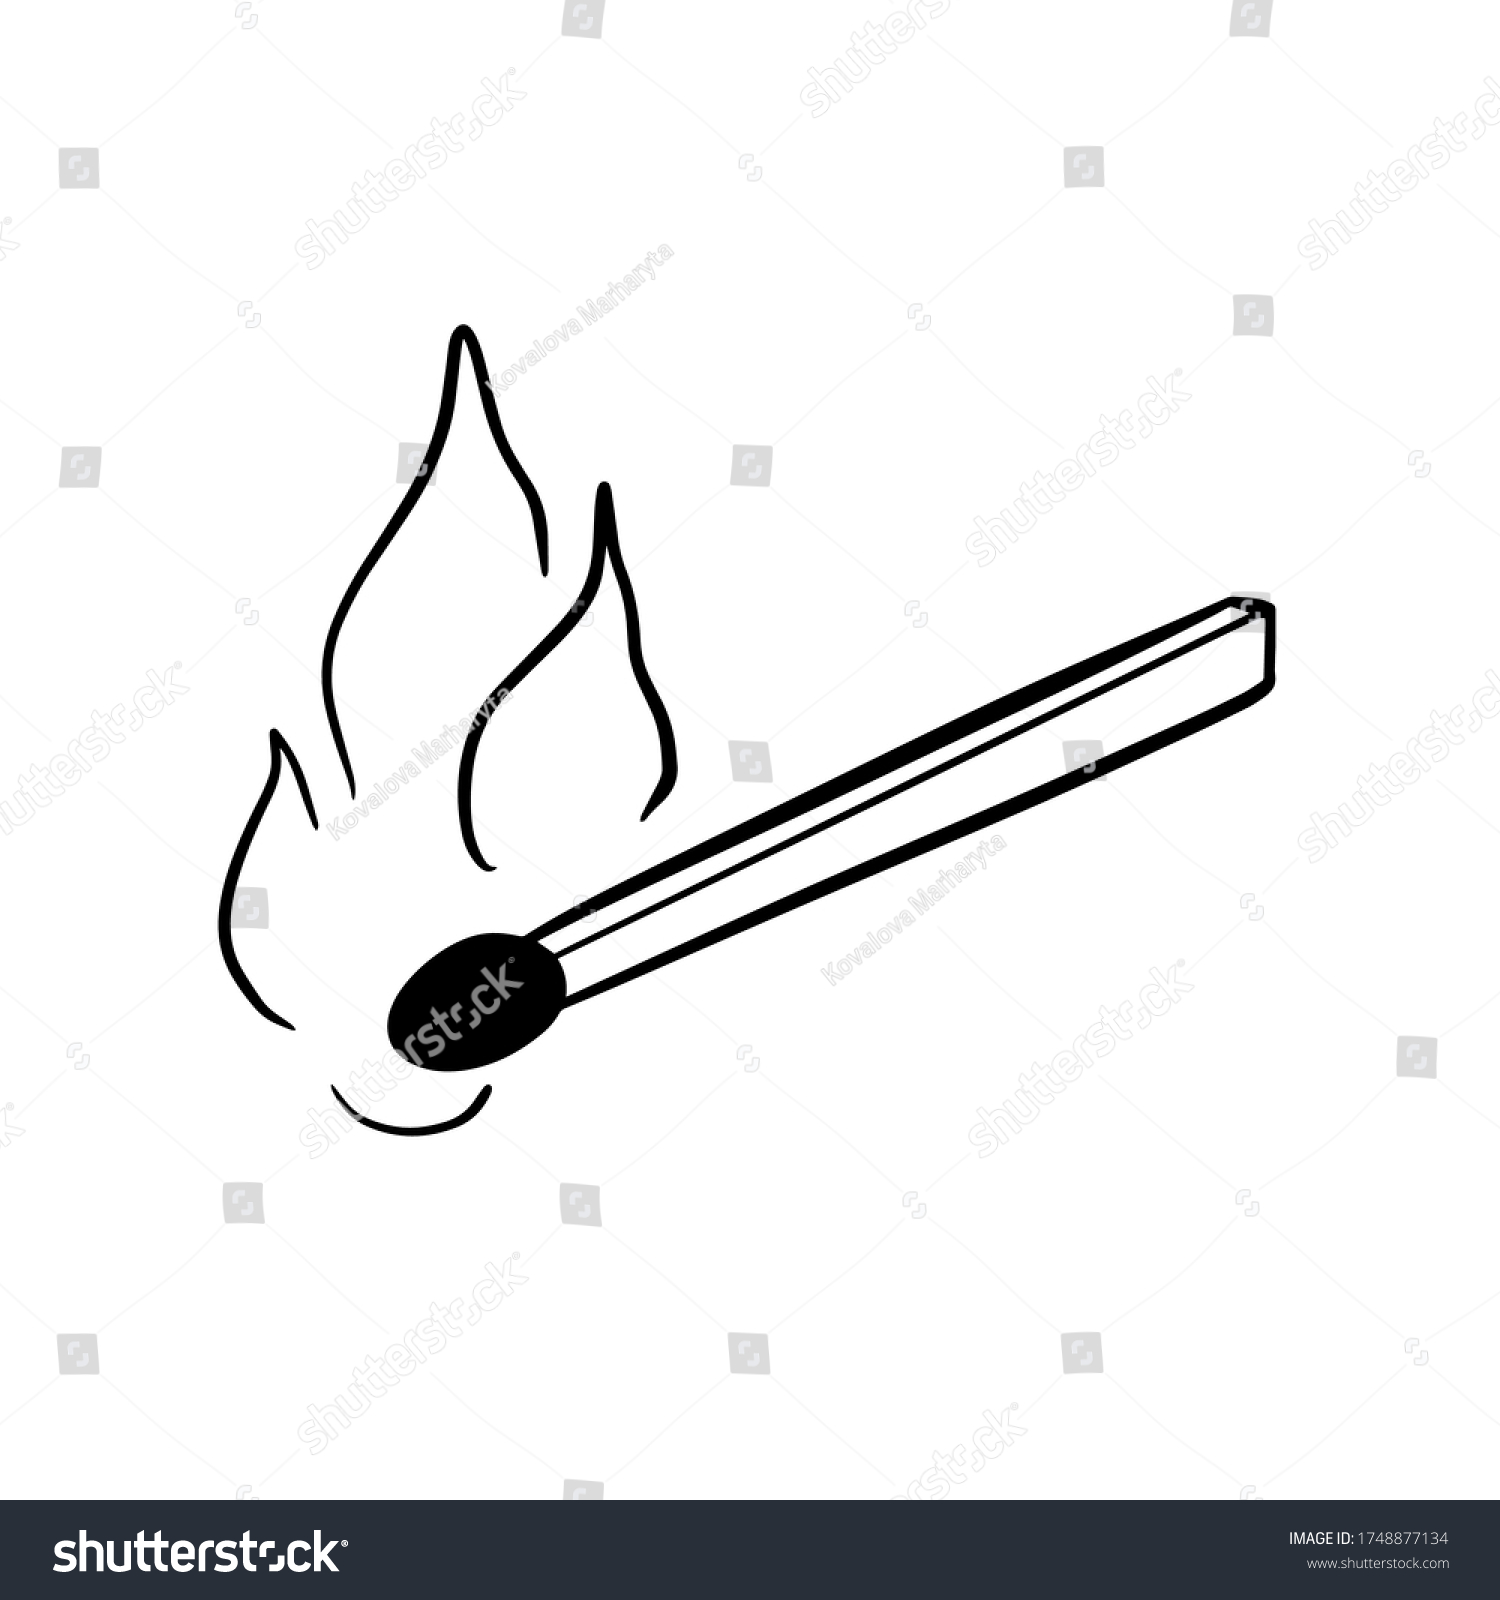 Cartoon Burning Match Drawing Sketch for Adult